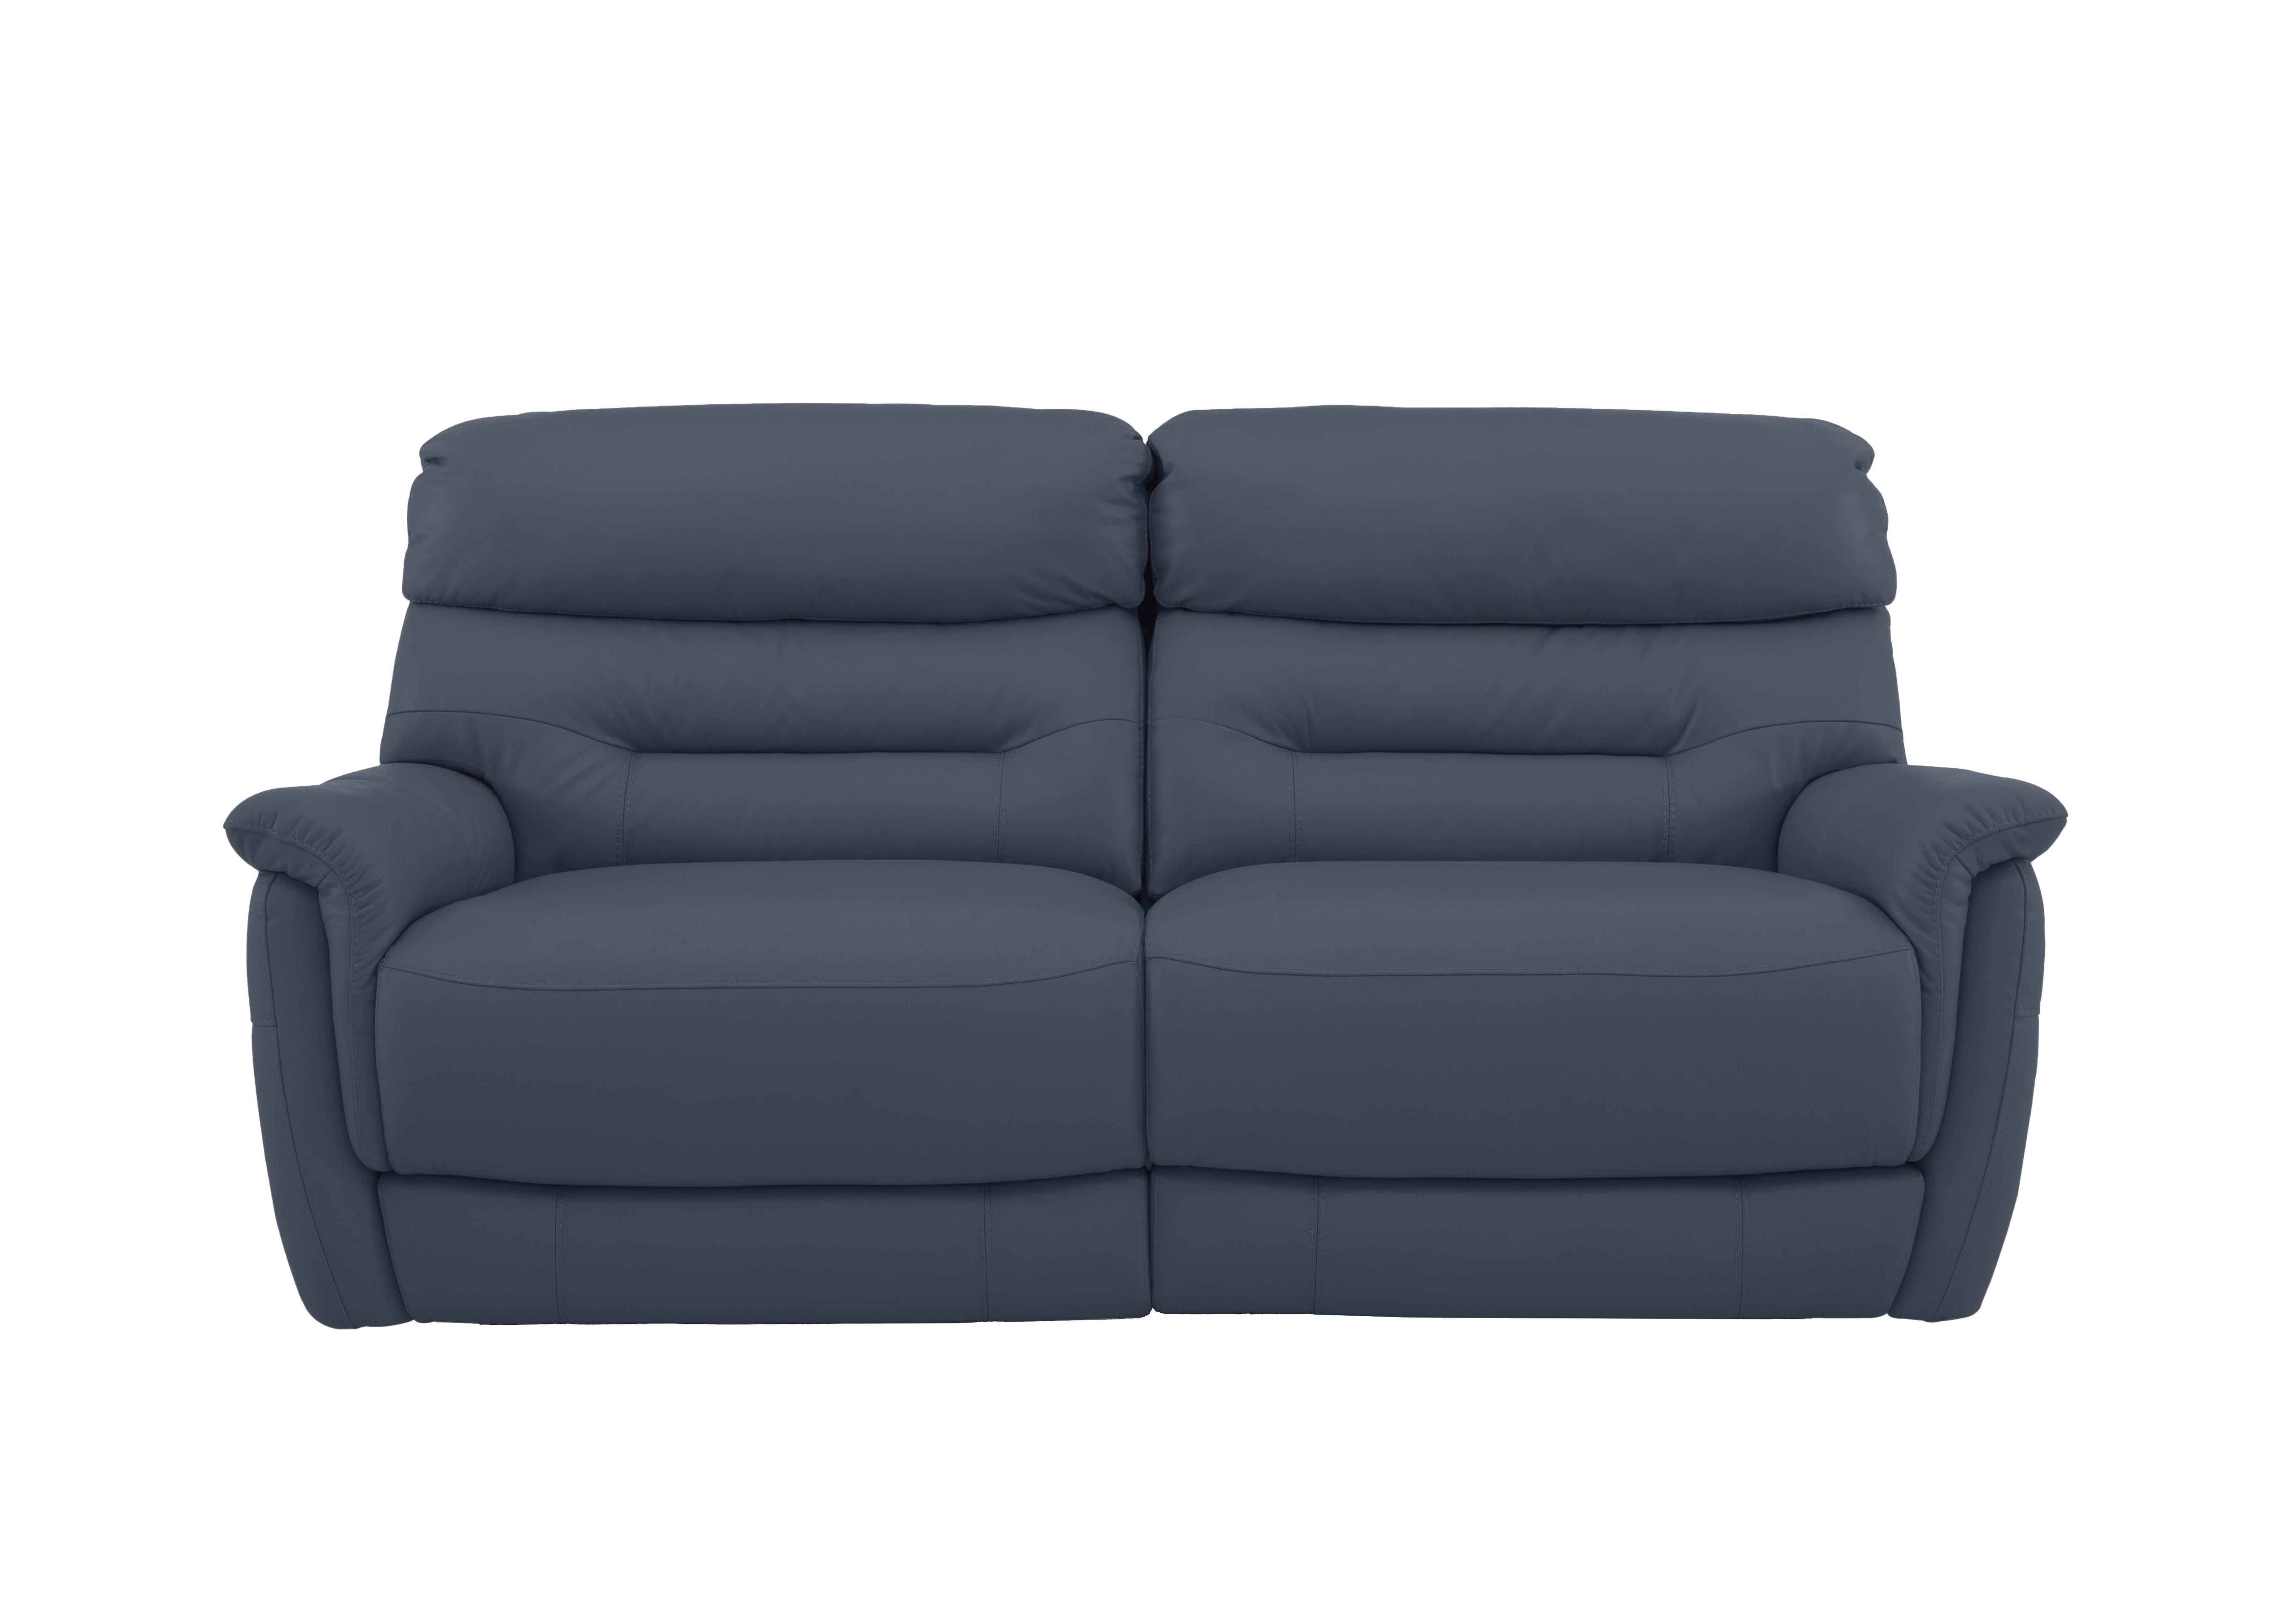 Chicago 3 Seater Leather Sofa in Bv-313e Ocean Blue on Furniture Village